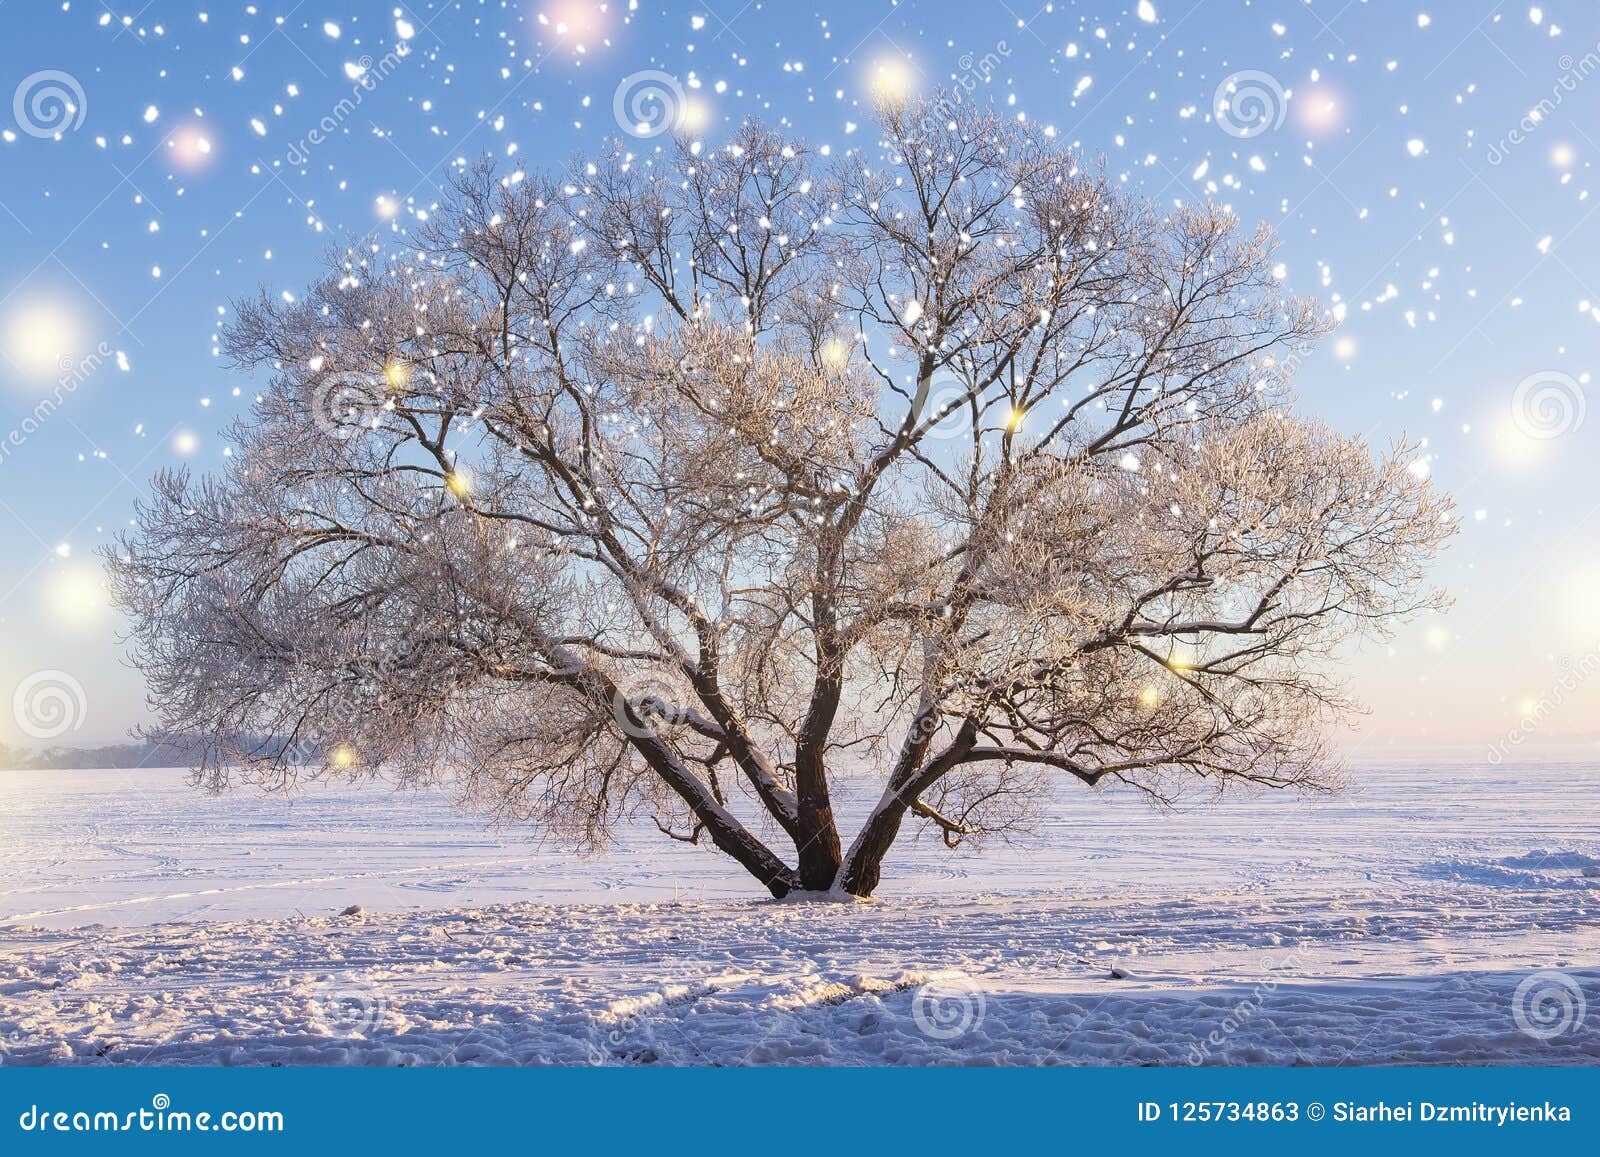 Christmas Background Winter Nature Landscape With Glowing Snowflakes